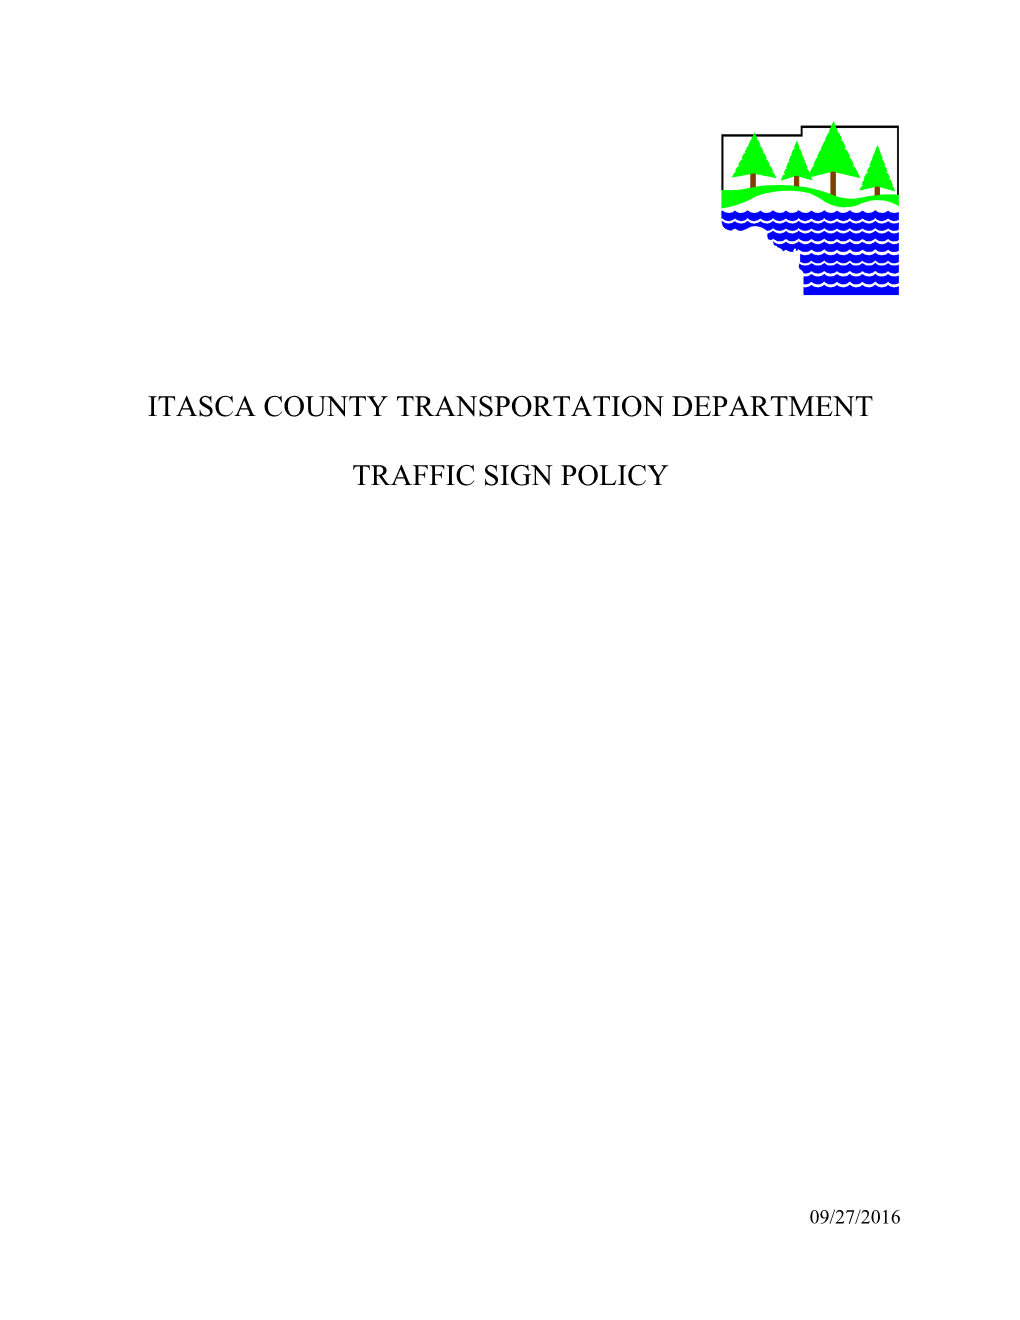 Itasca County Transportation Department Traffic Sign Policy